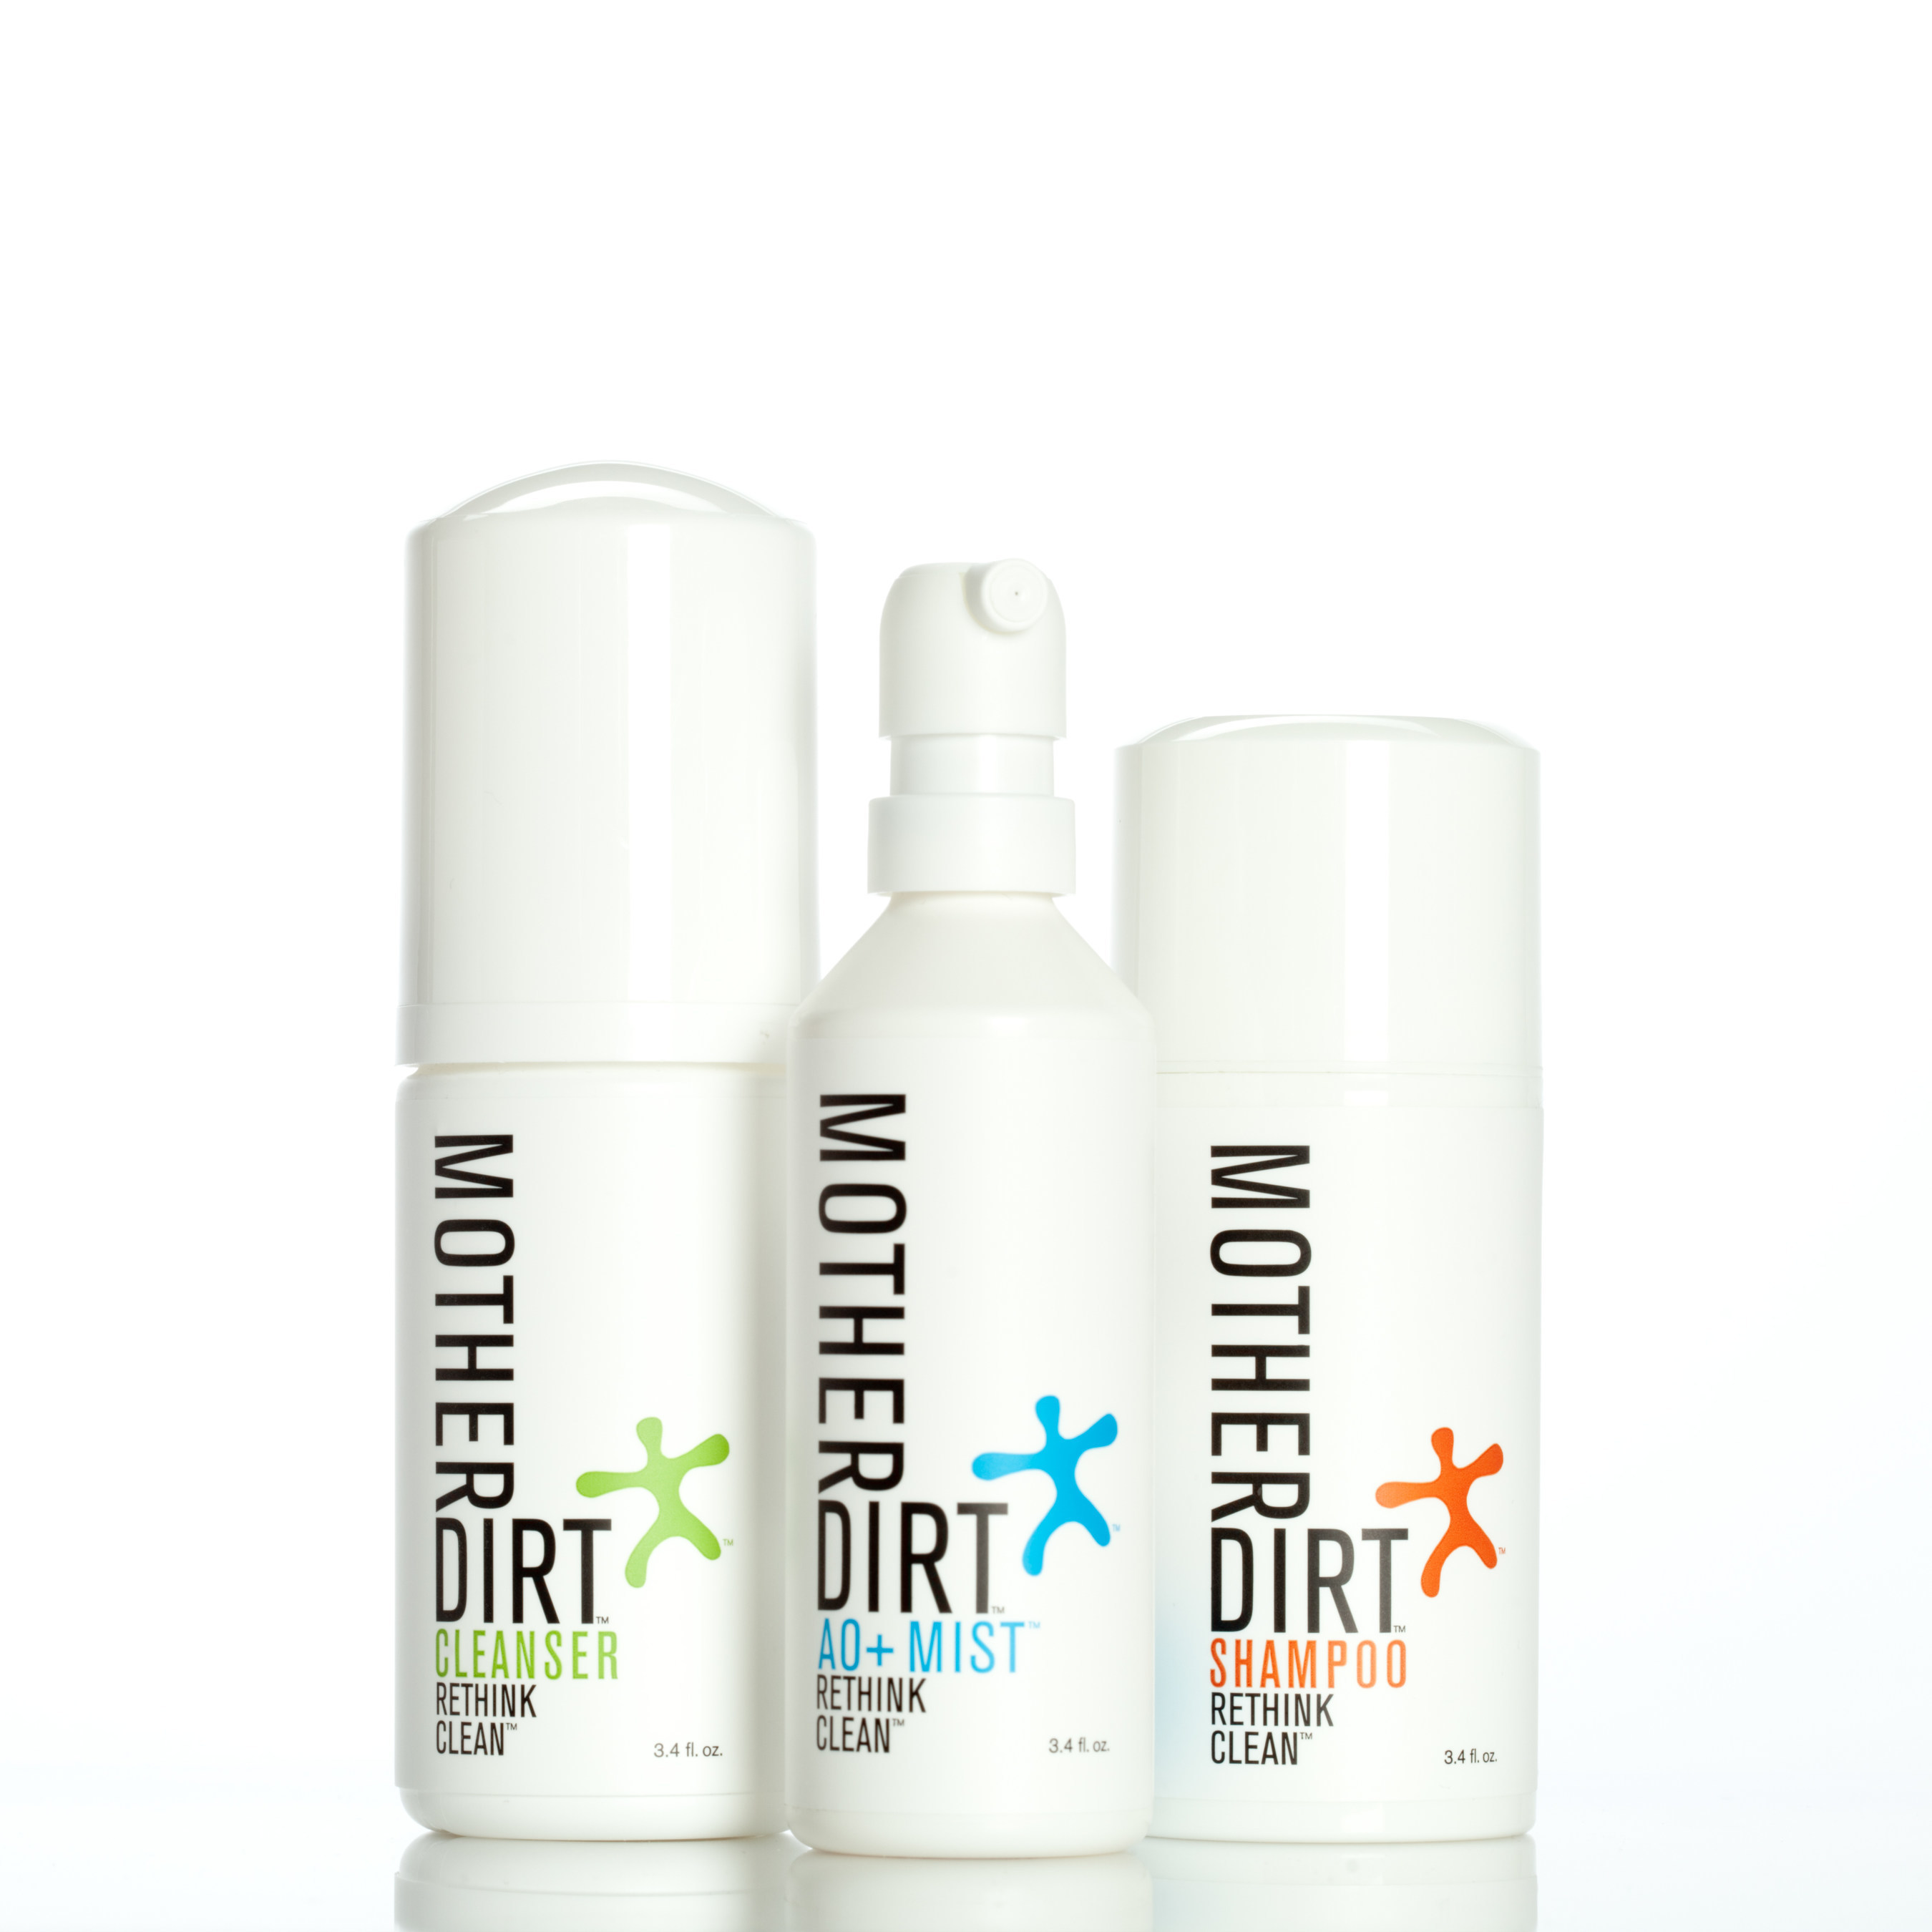 The line includes Mother Dirt Cleanser, Mother Dirt AO  Mist and Mother Dirt Shampoo